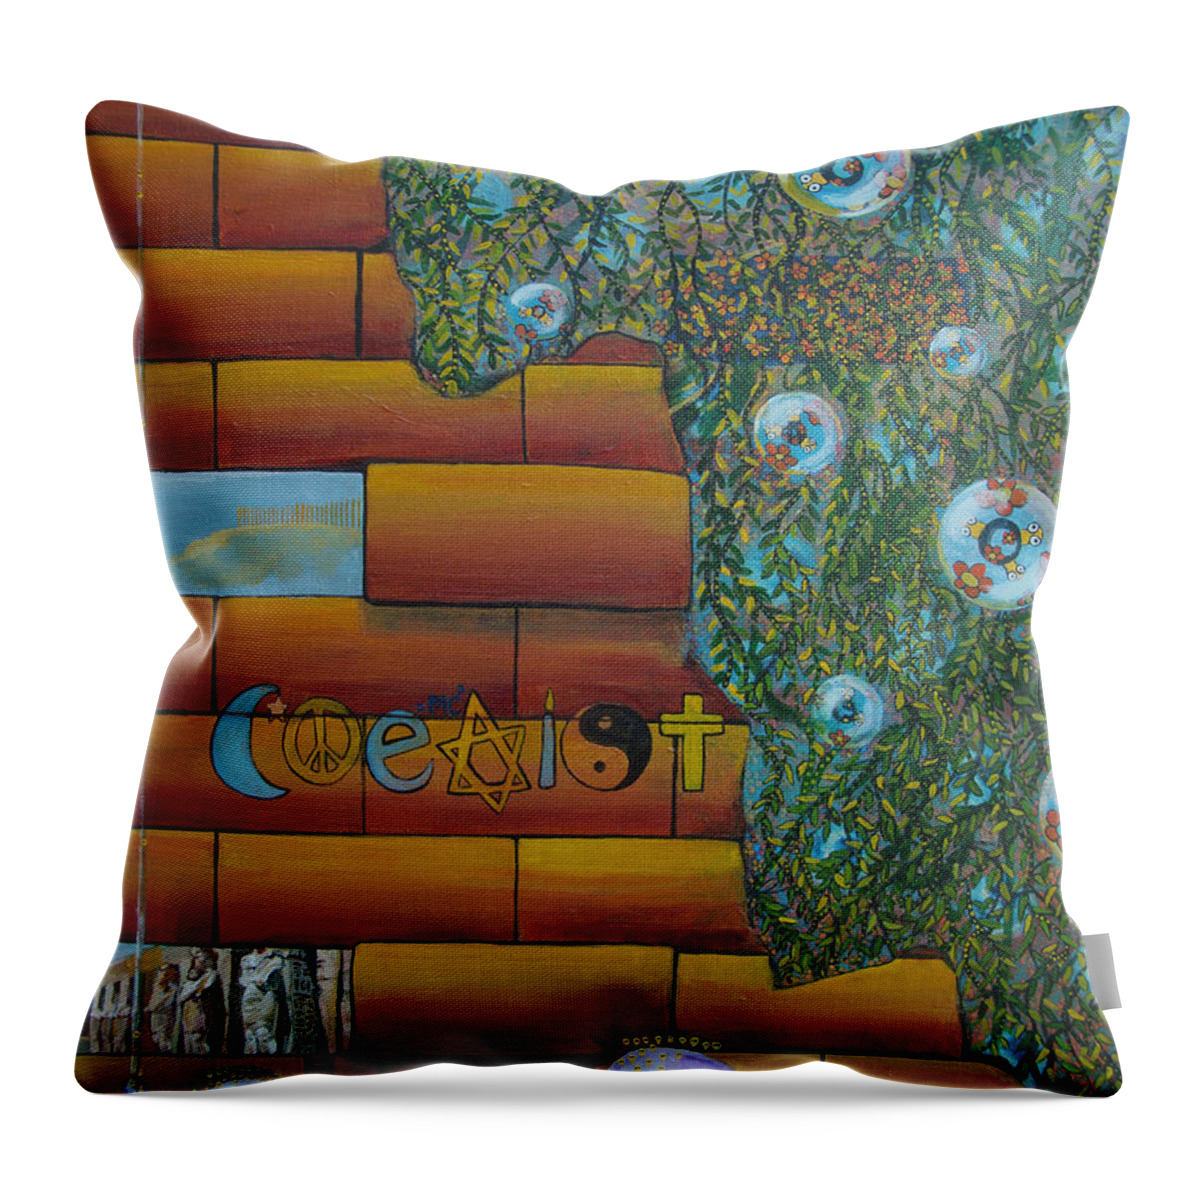 Coexist Throw Pillow featuring the painting Coexist by Mindy Huntress